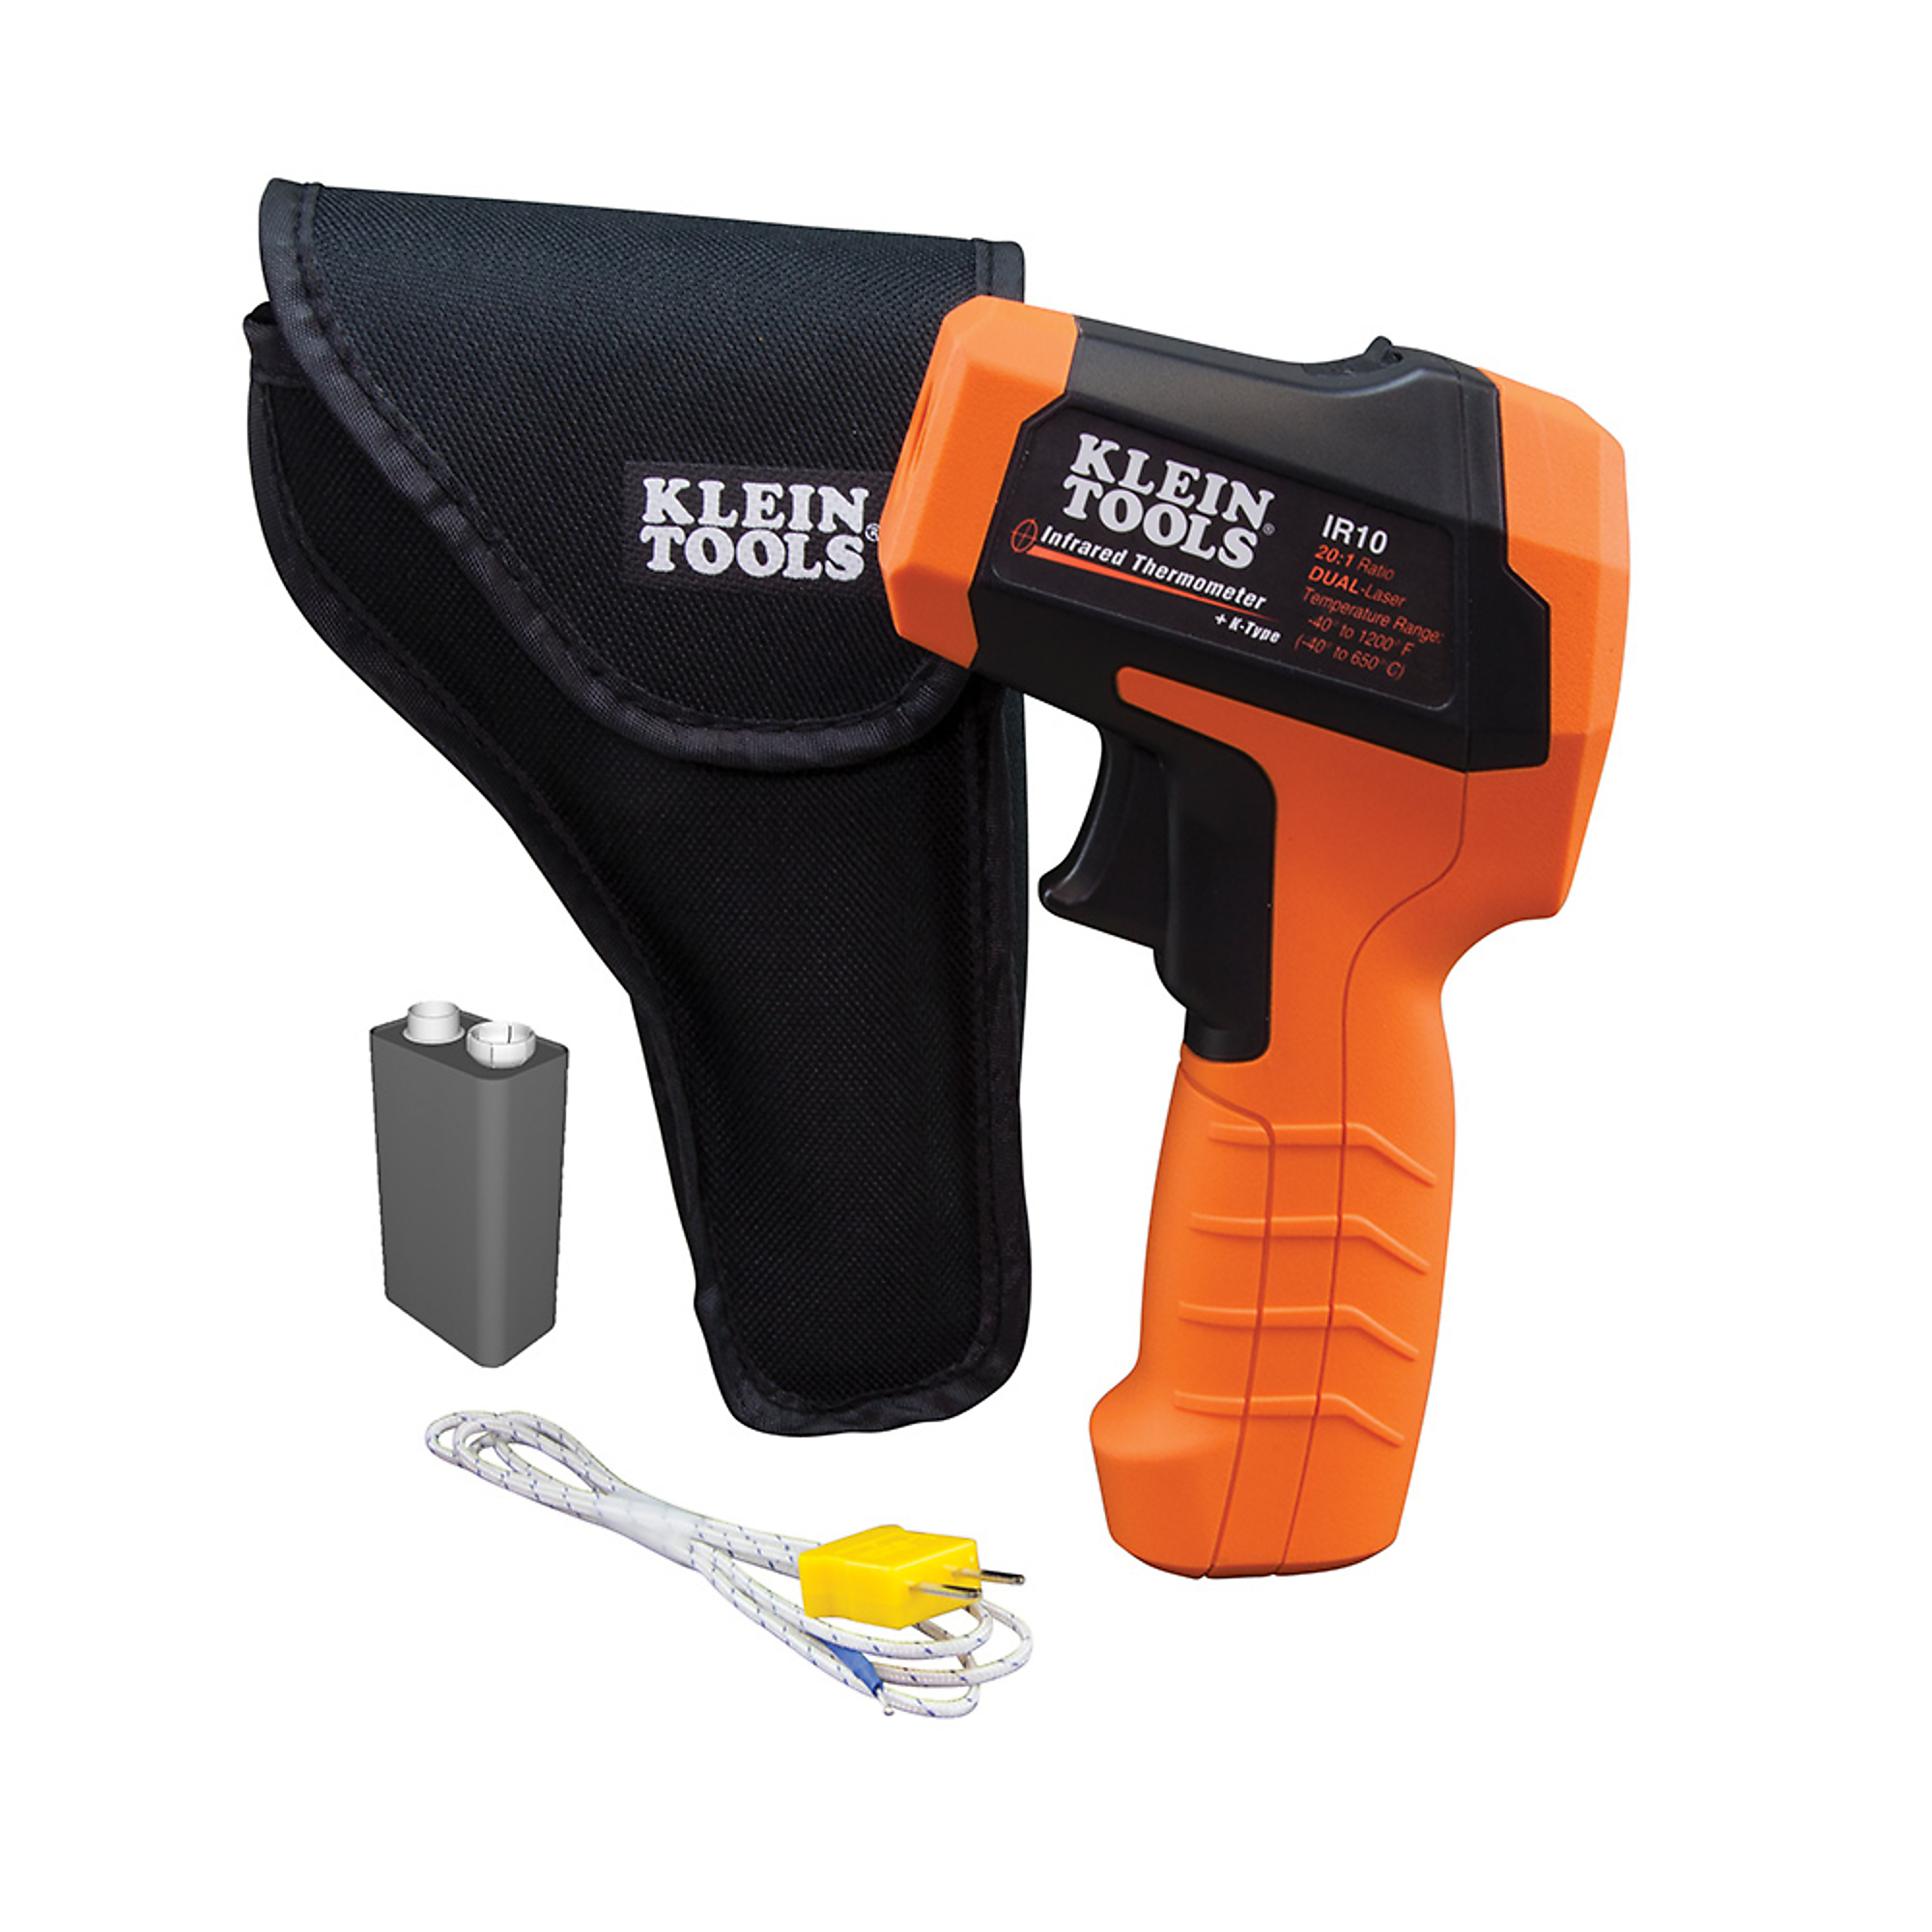 Klein Tools, Dual-Laser Infrared Therm, 20:1 Ratio 20:1 Model IR10